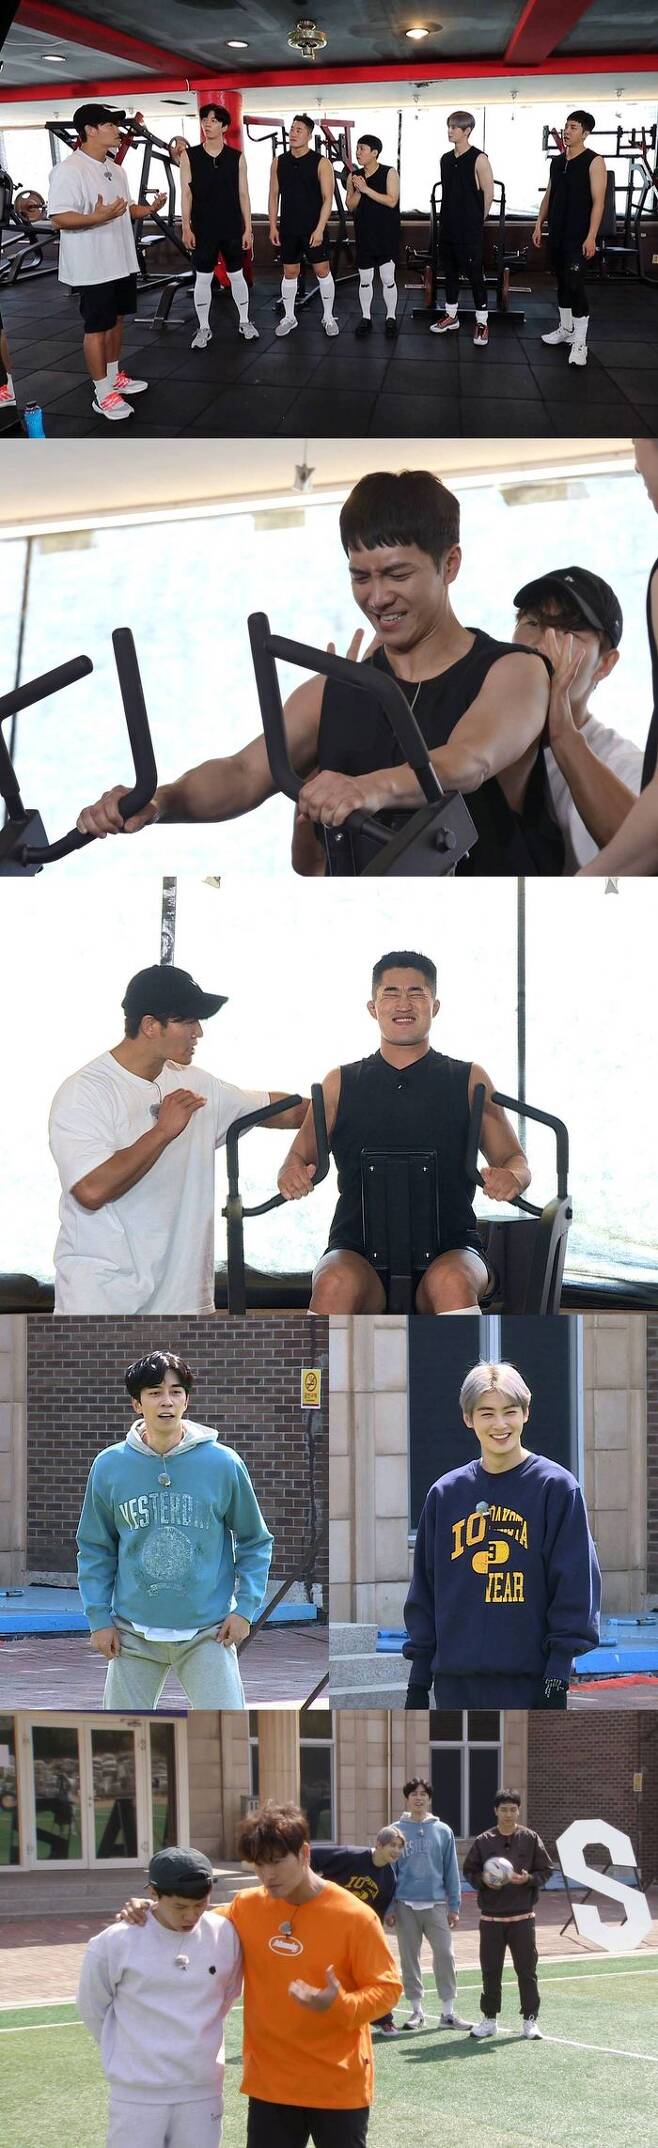 In SBS All The Butlers, Hardcore Holly Exercise course without exit prepared by Master Kim Jong-kook is held.Kim Jong-kook, who gave delicious Exercise tips to members from the last broadcast to bed, will guide members to a gym called the Myuschulin restaurant this time.Kim Jong-kook, who could not hide his excitement about Exercise, showed extreme exercise with different dimensions such as Squat 140kg carrying Kim Dong-Hyun.The members were surprised to see the muscles of Kim Jong-kook, who was stimulated and angry, and said, I feel like I have a full egg on my back.In addition, the members challenged the circit training of hell proposed by Kim Jong-kook.Kim Jong-kook table Mara Taste Exercise Course without any break I wonder who will survive safely.In the Kim Jong-kook table vacation, the members and the unidentified UCLA footwear team (?) are accompanied by the footwear Battle.The confident members were embarrassed by the unexpected performance of the opponent team.In the end, Kim Jong-kook, who was burned by the desire to win, was dragged out of the roar and laughed.In particular, Yang had a time with Kim Jong-kook and received intensive education.Who will be the winner in the All The Butlers ships great foothold Battle with the opponent team, and the hells health vacation with the hicks will be unveiled on SBS All The Butlers broadcasted at 6:25 pm on the 25th (Sunday).